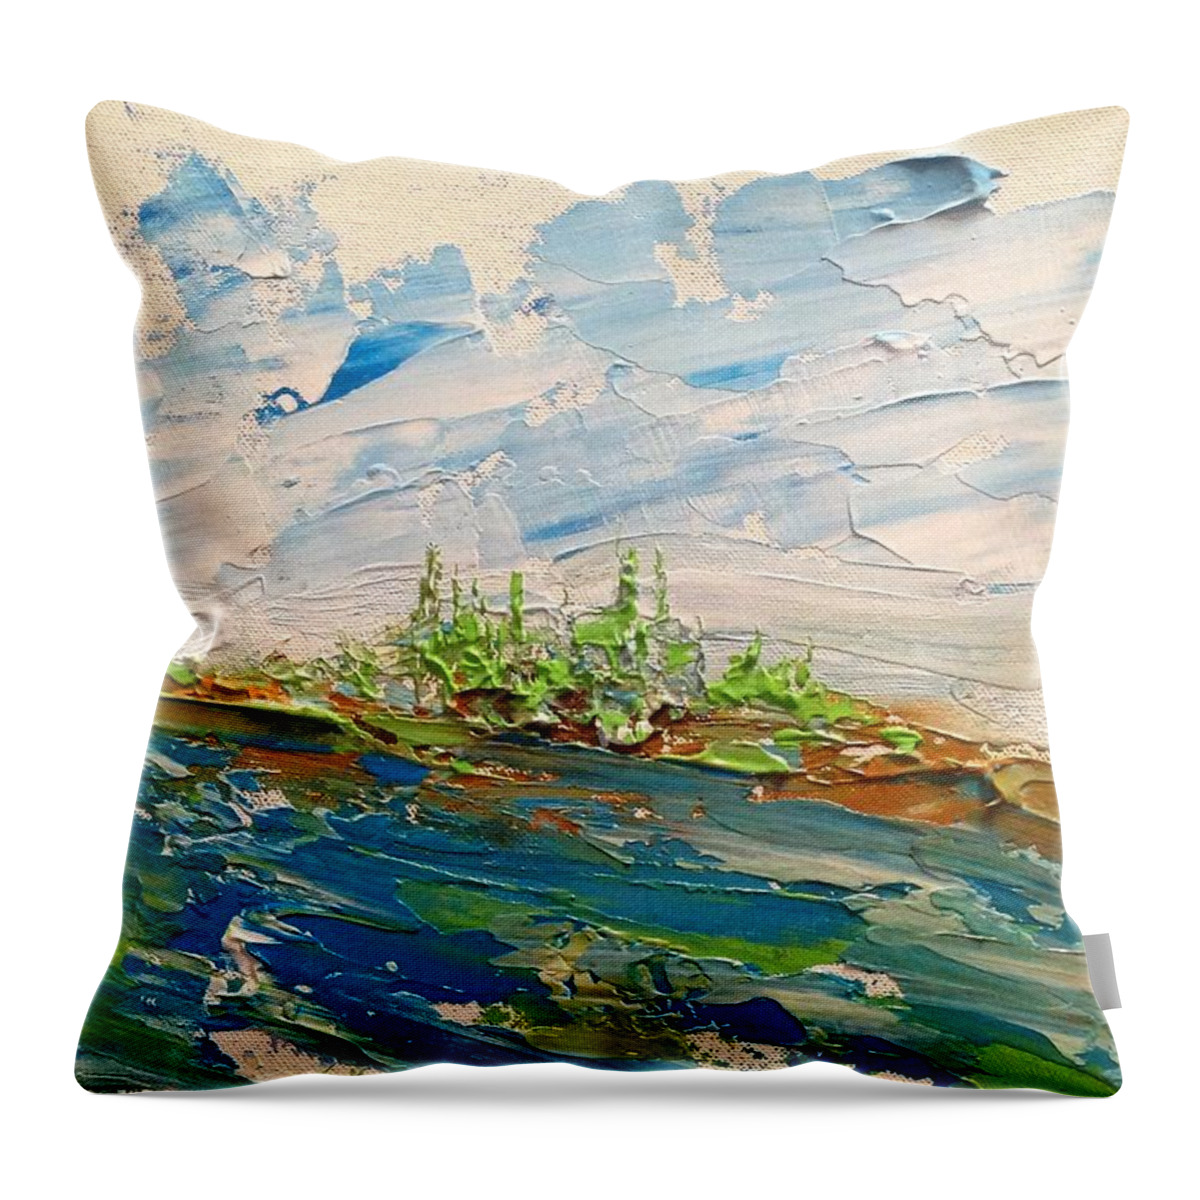 Abstract Landscape Throw Pillow featuring the painting Shield Scrape by Desmond Raymond